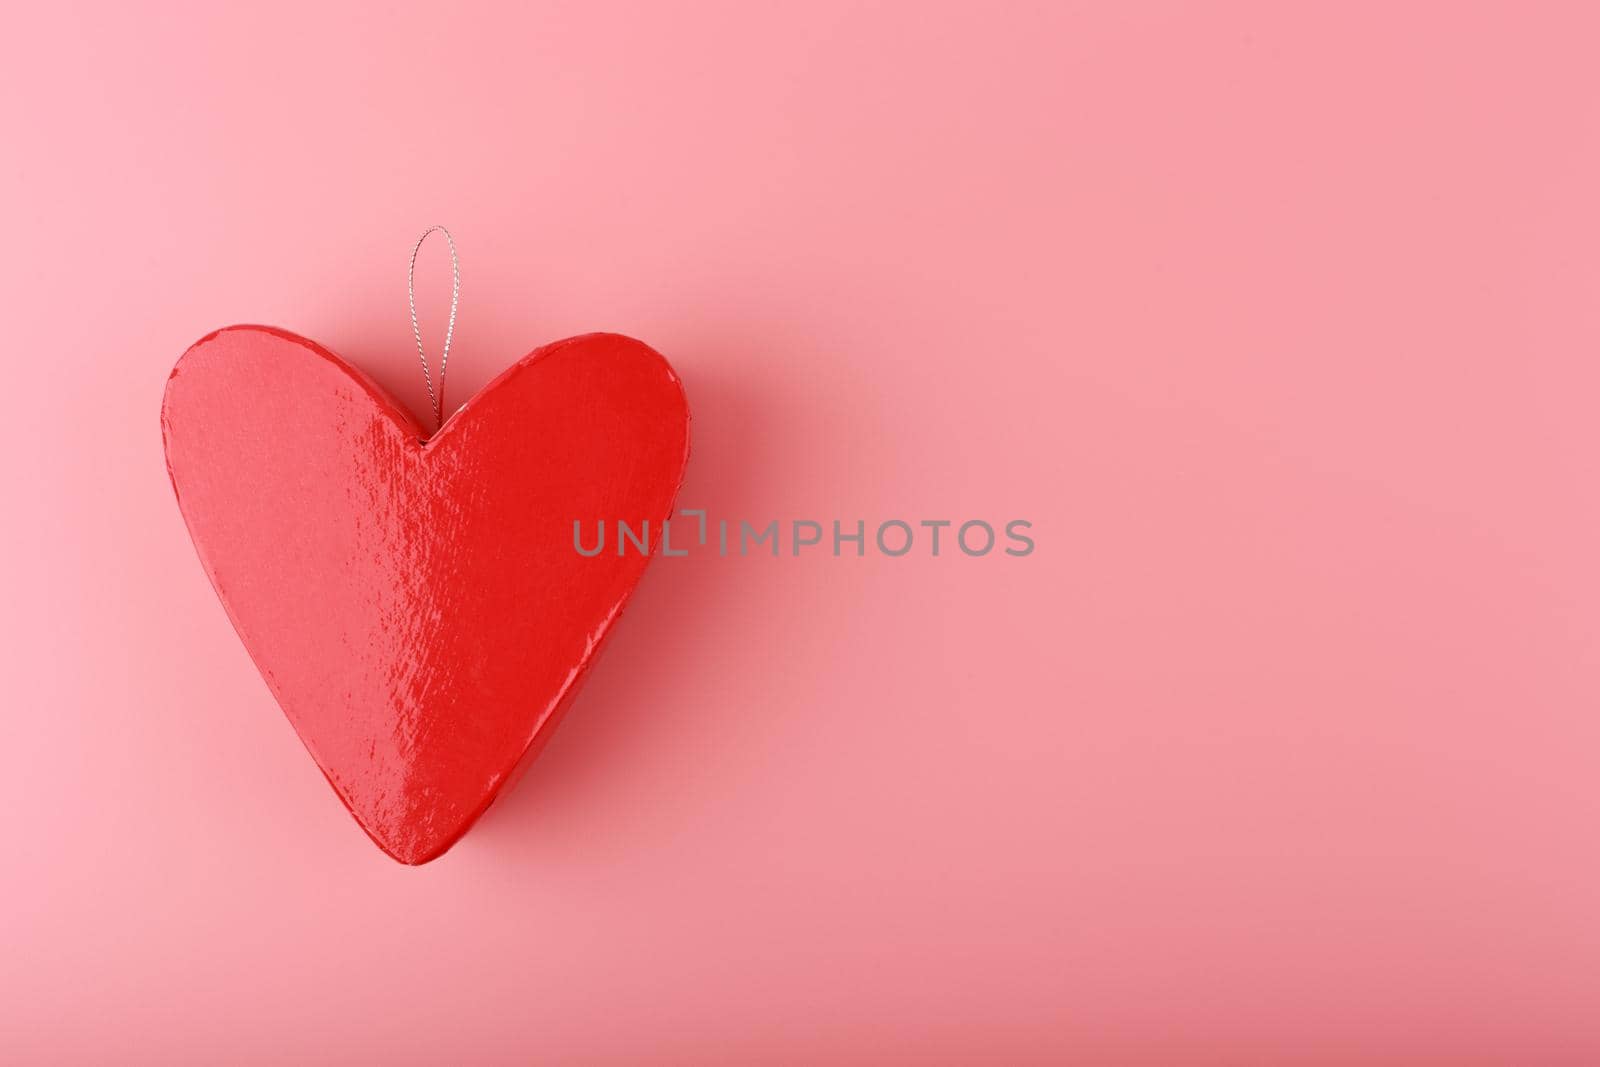 Heart shaped red gift box on pink background with copy space. Concept of St. Valentine's day and presents by Senorina_Irina